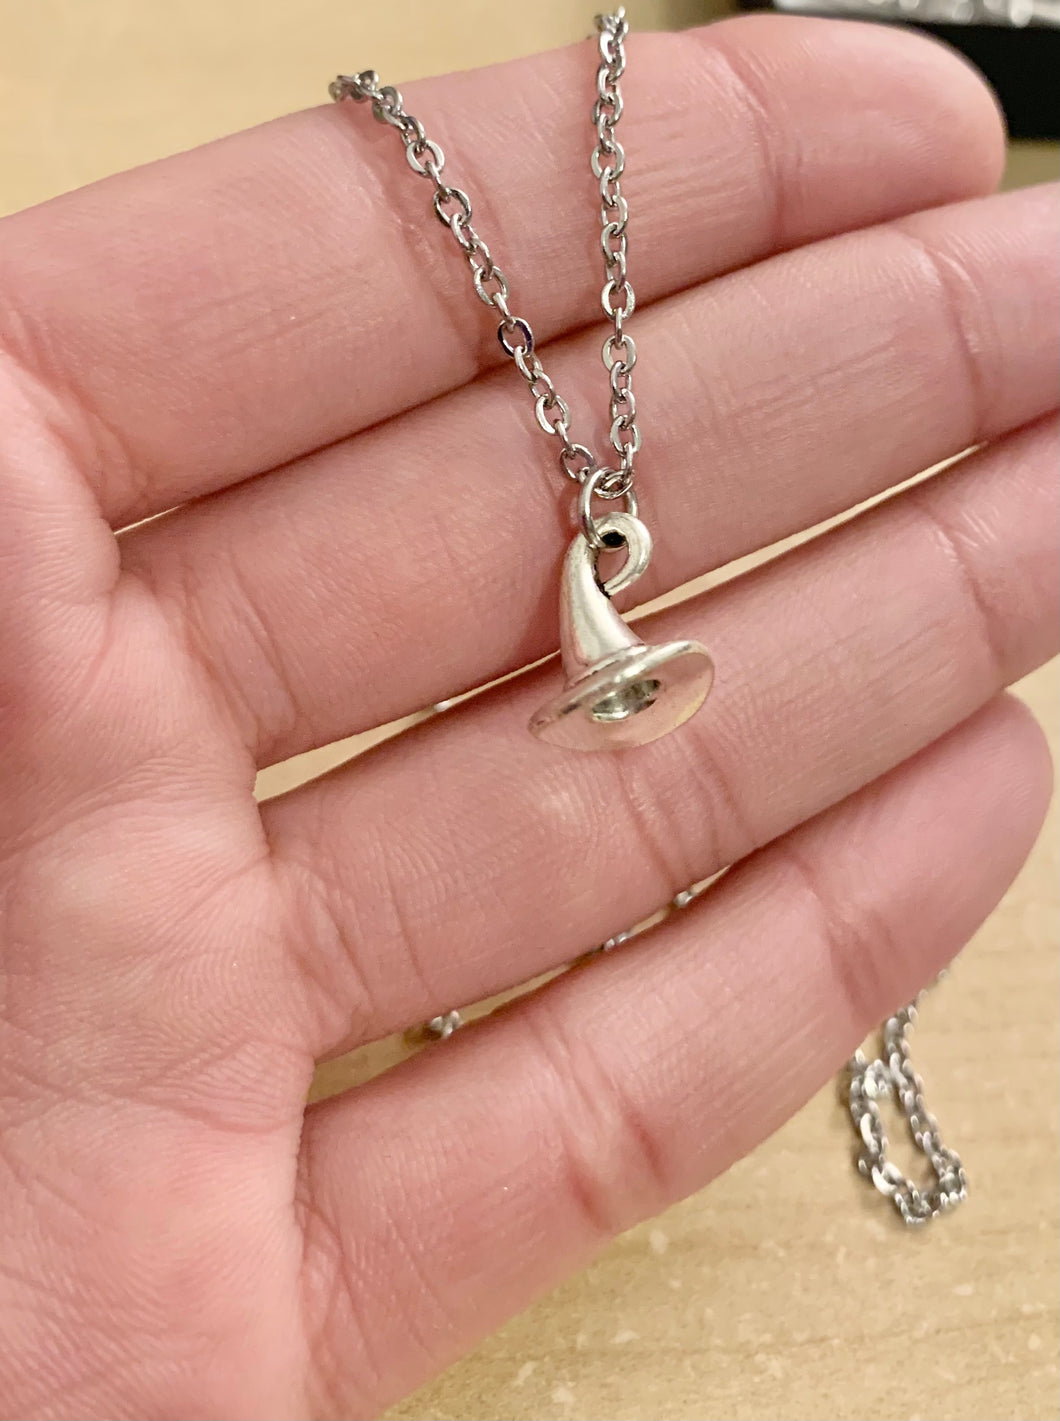 Witch’s Hat Necklace - stainless steel necklace with 3D witch hat charm